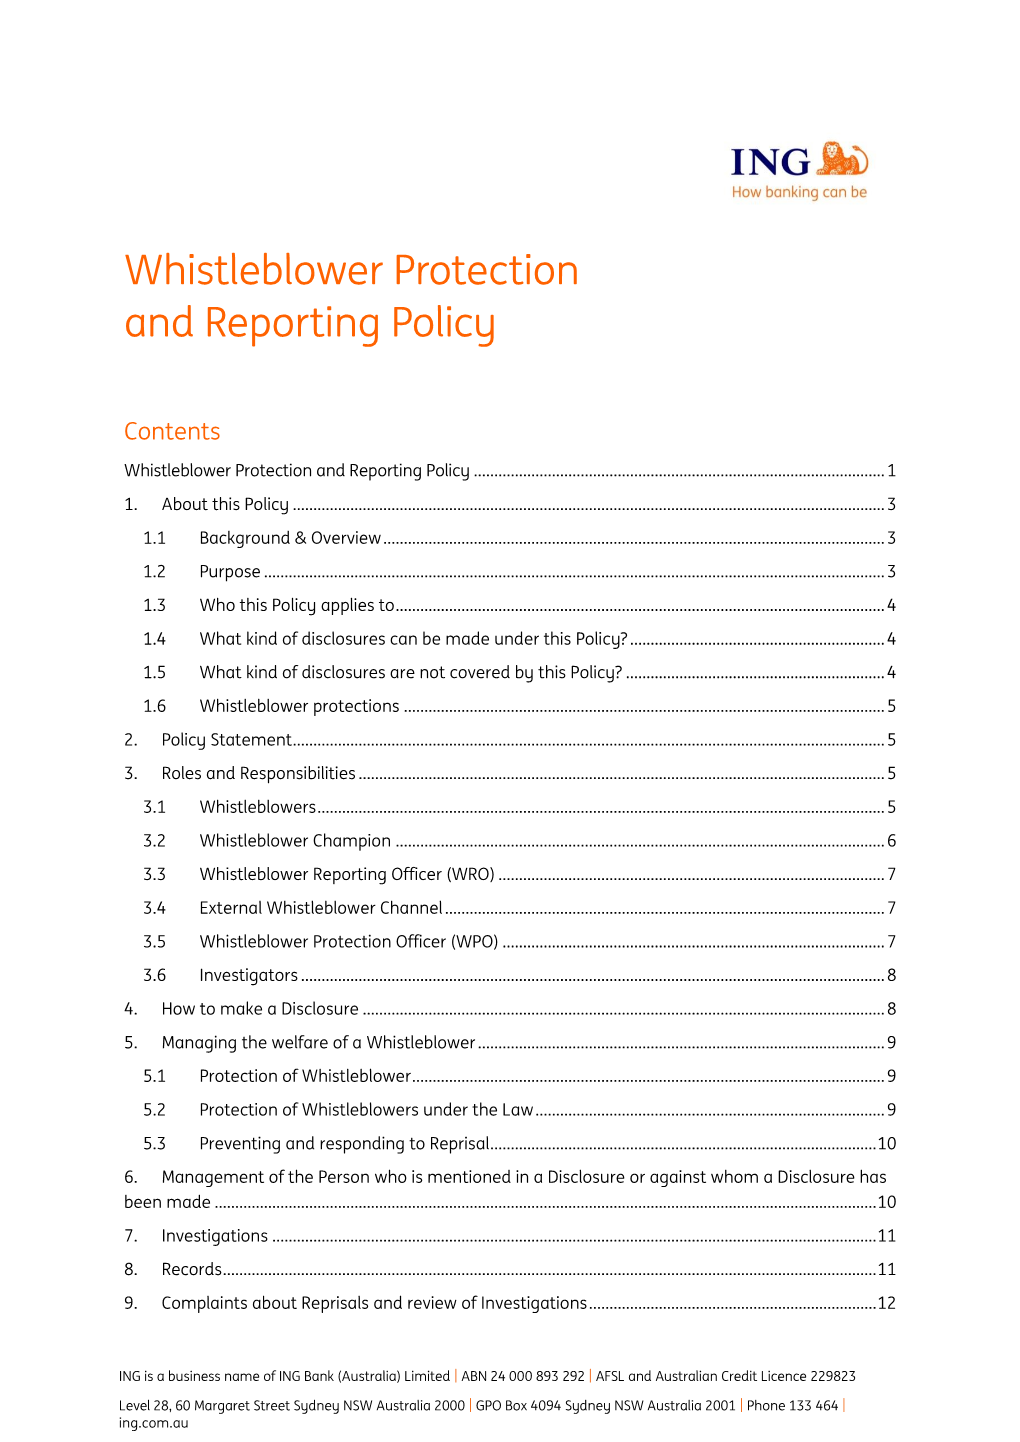 Whistleblower Protection and Reporting Policy